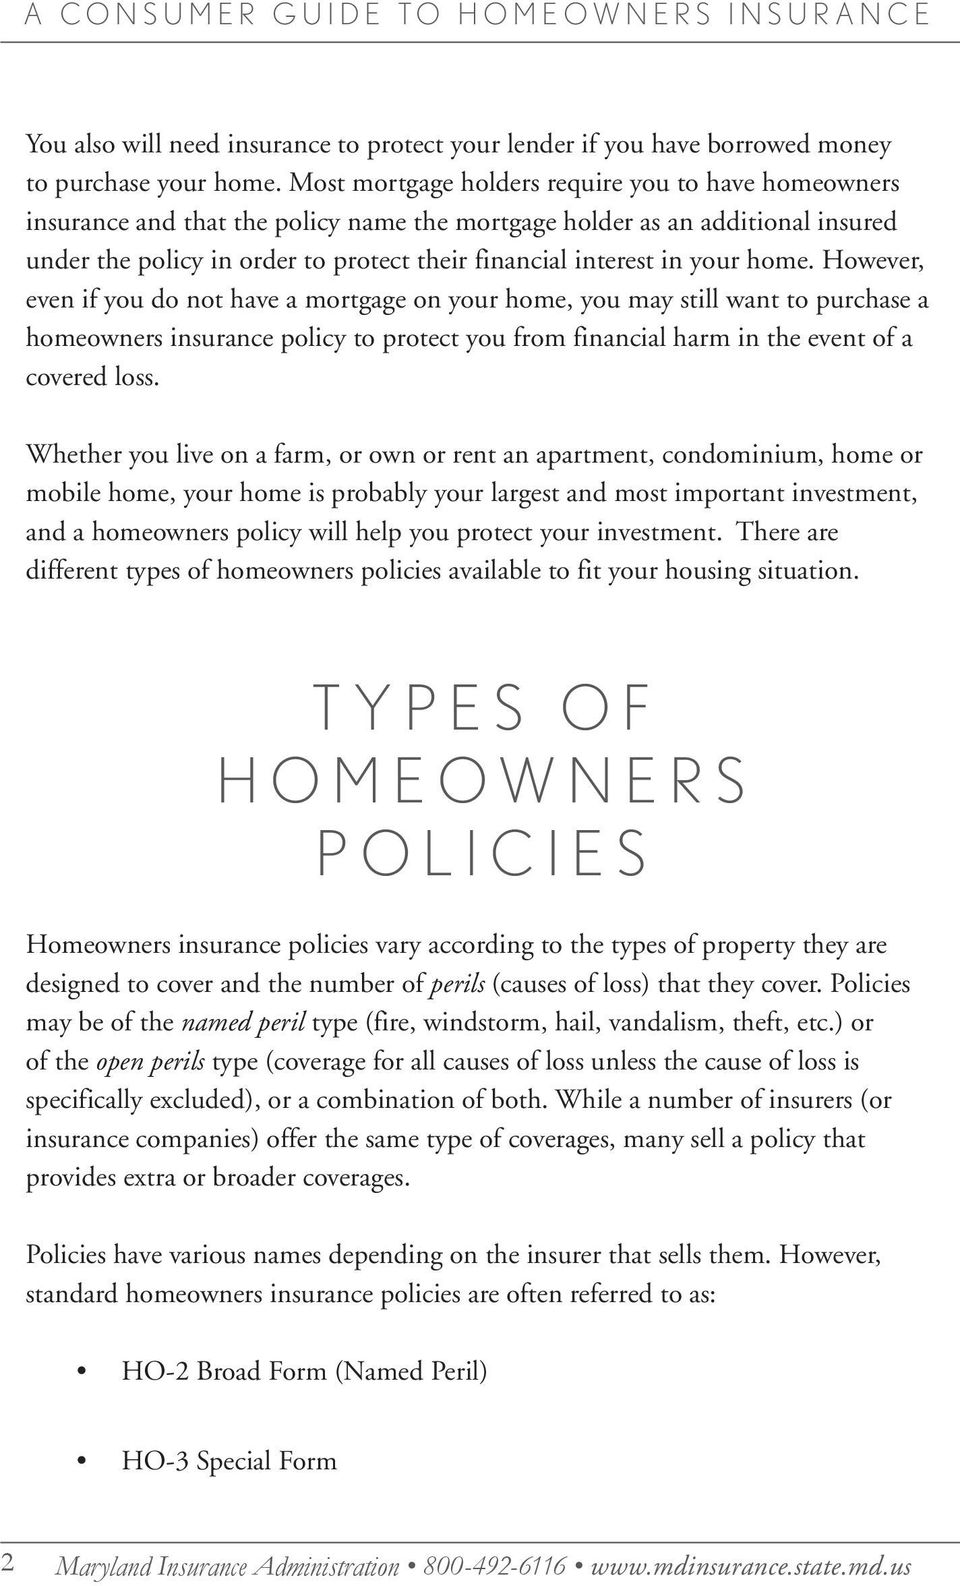 your home. However, even if you do not have a mortgage on your home, you may still want to purchase a homeowners insurance policy to protect you from financial harm in the event of a covered loss.